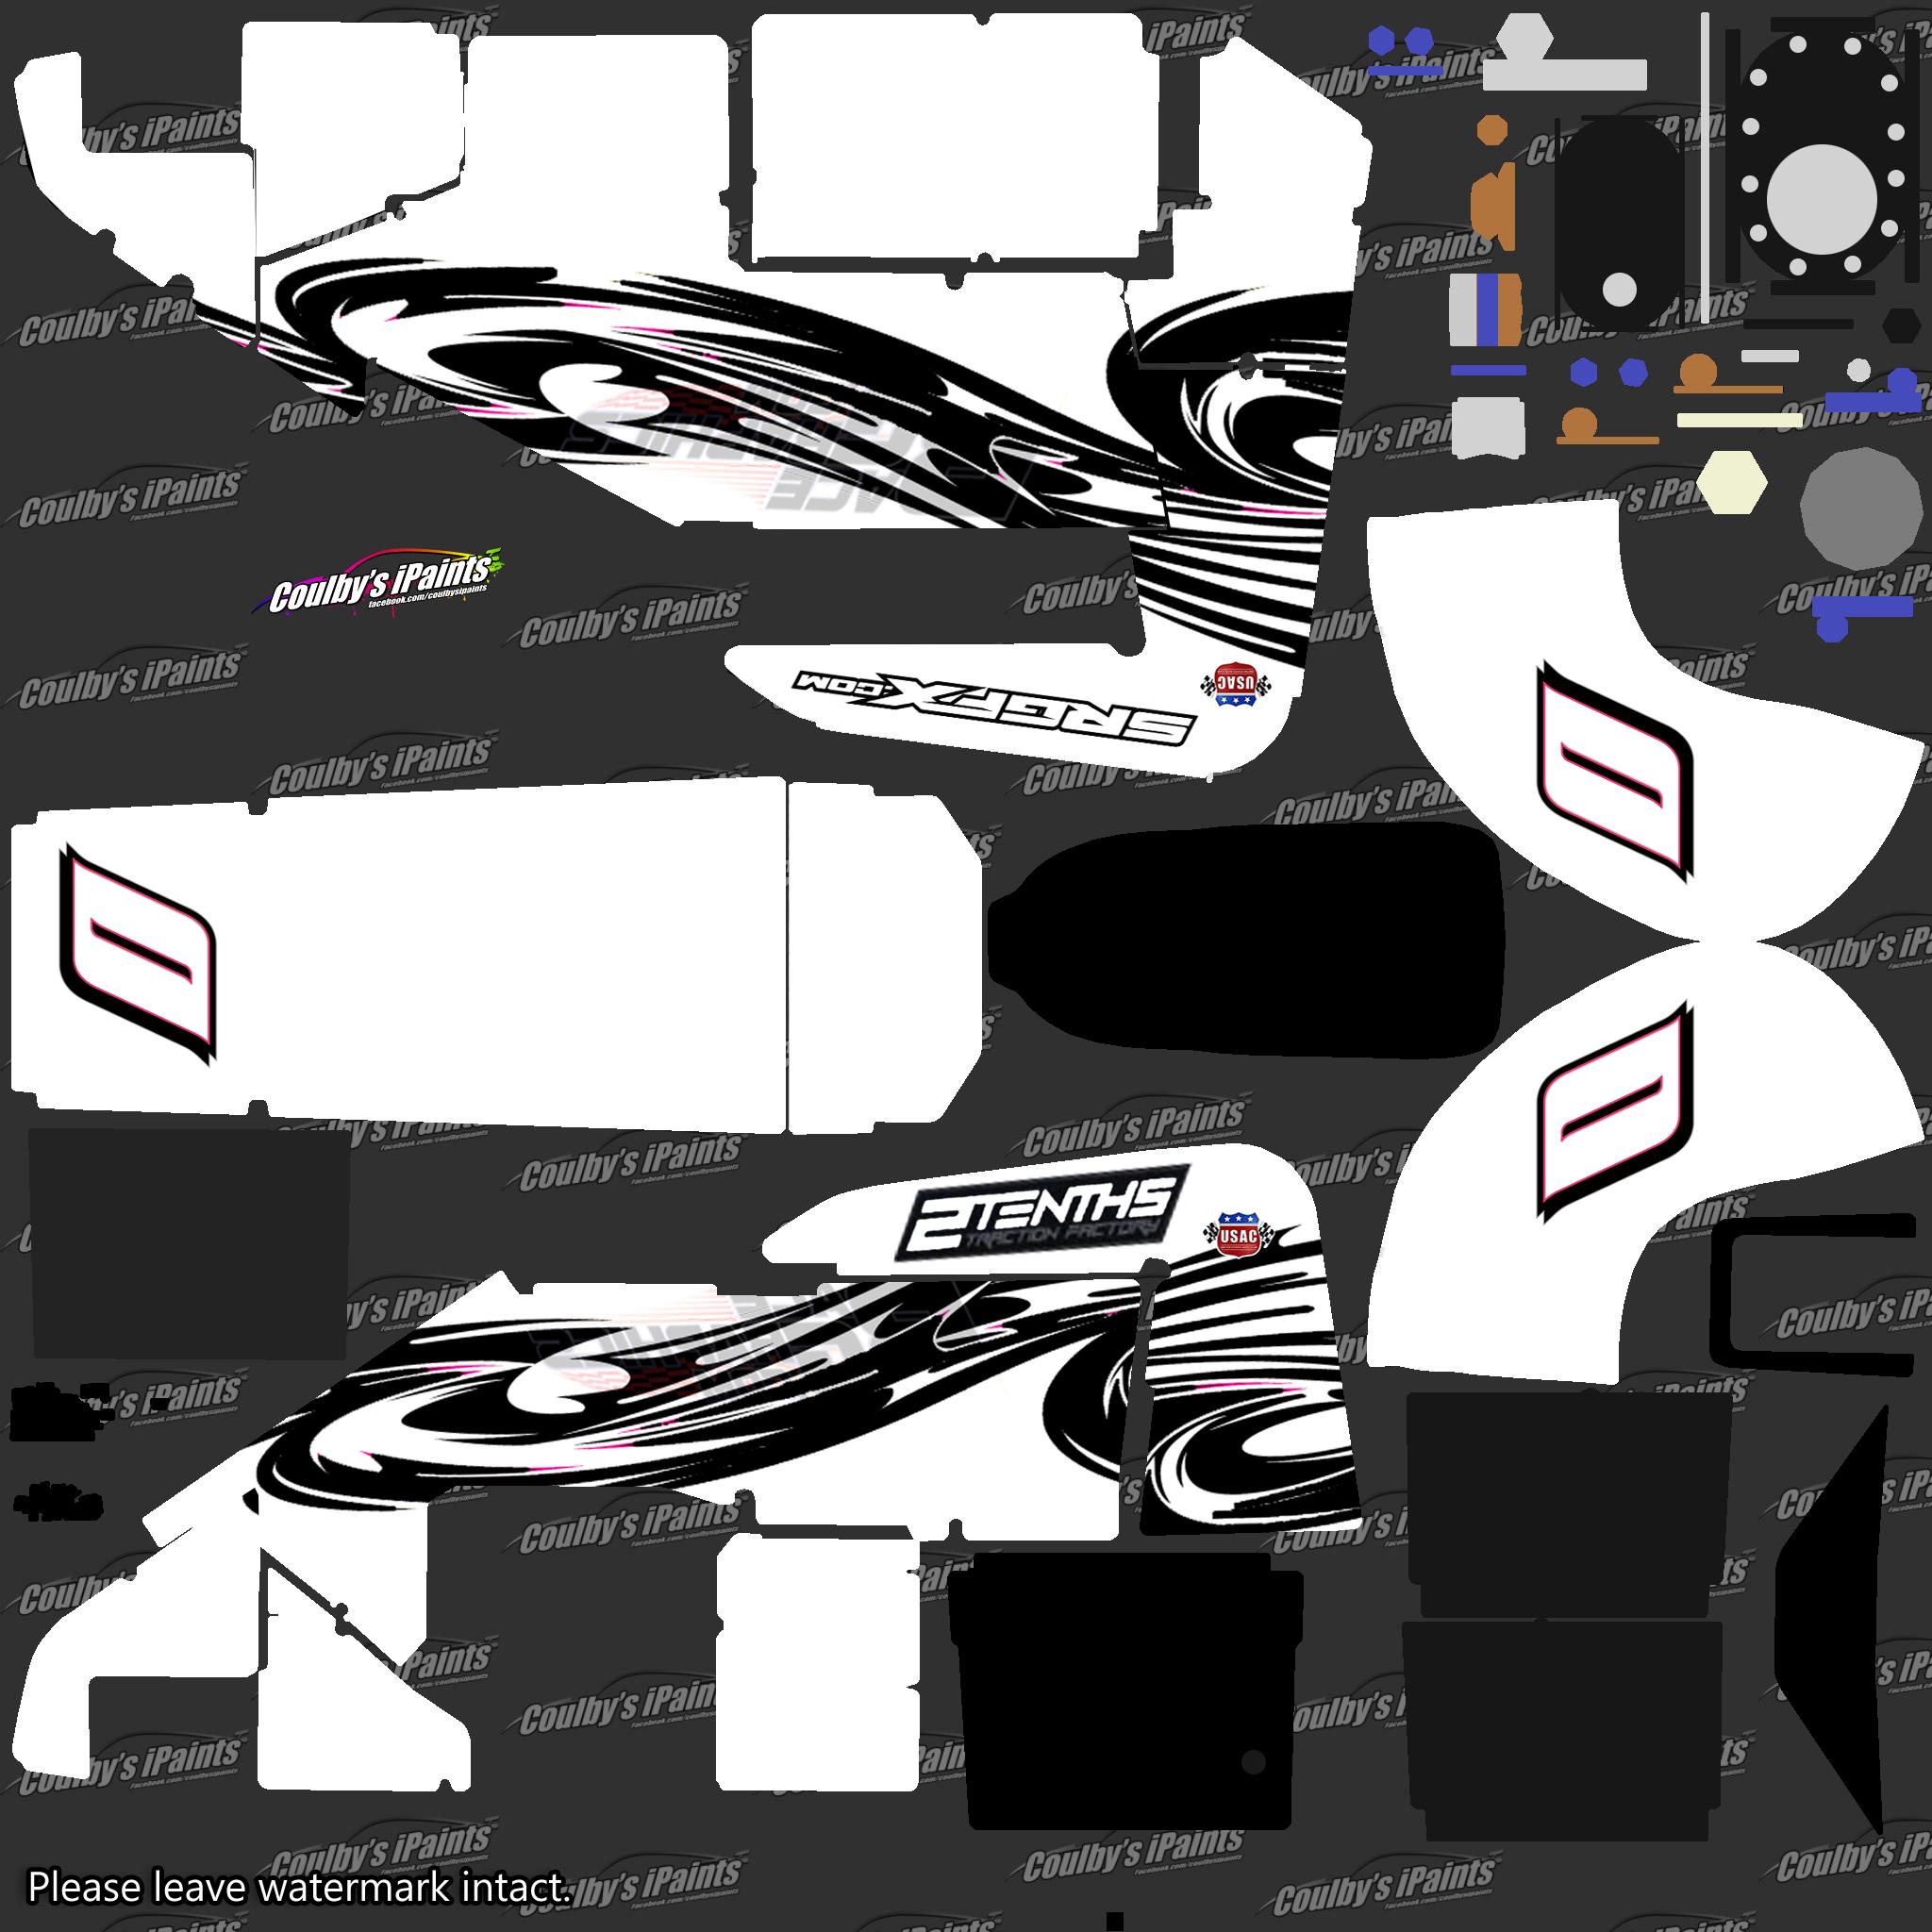 Dirt Midget Coulbys iPaints Smart Template 25 by Drey Maddox - Trading